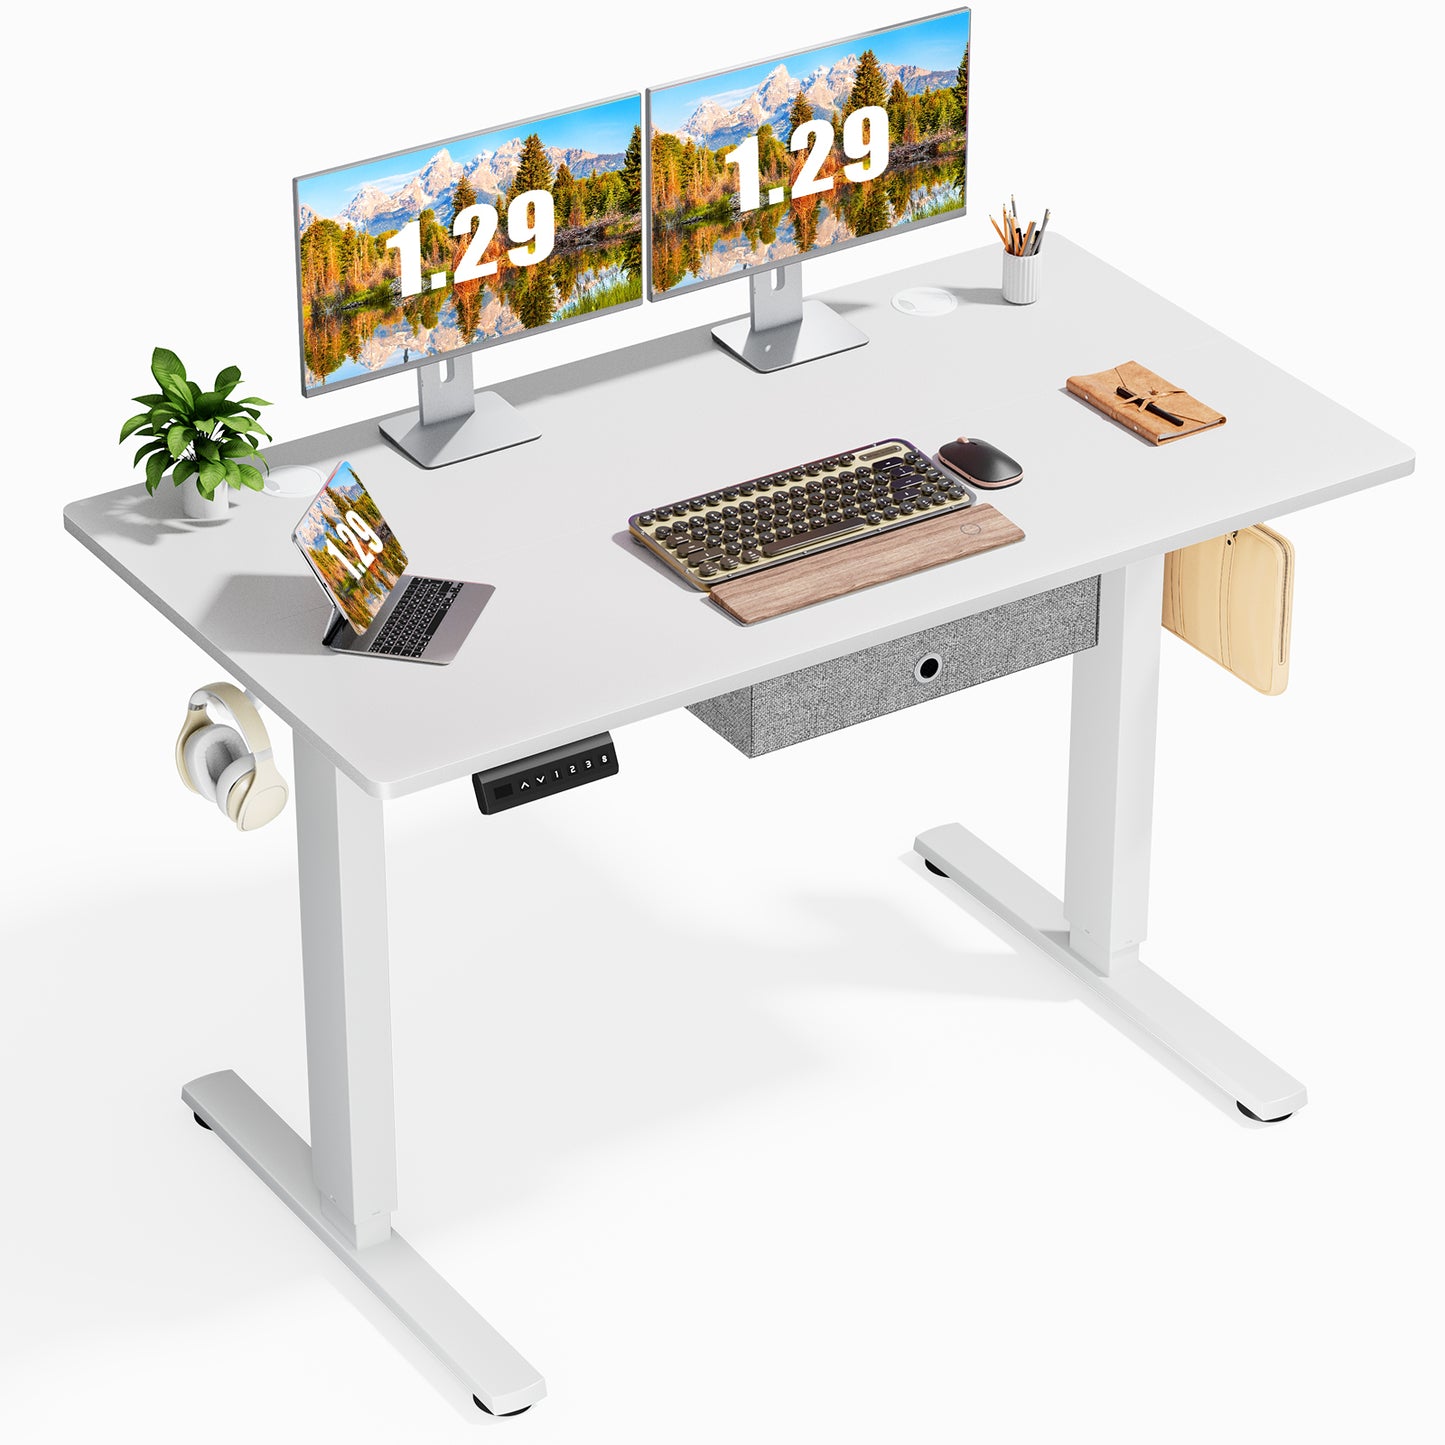 Ergonomic White Standing Desk with Storage Drawer and Adjustable Height, 48 x 24 Inches